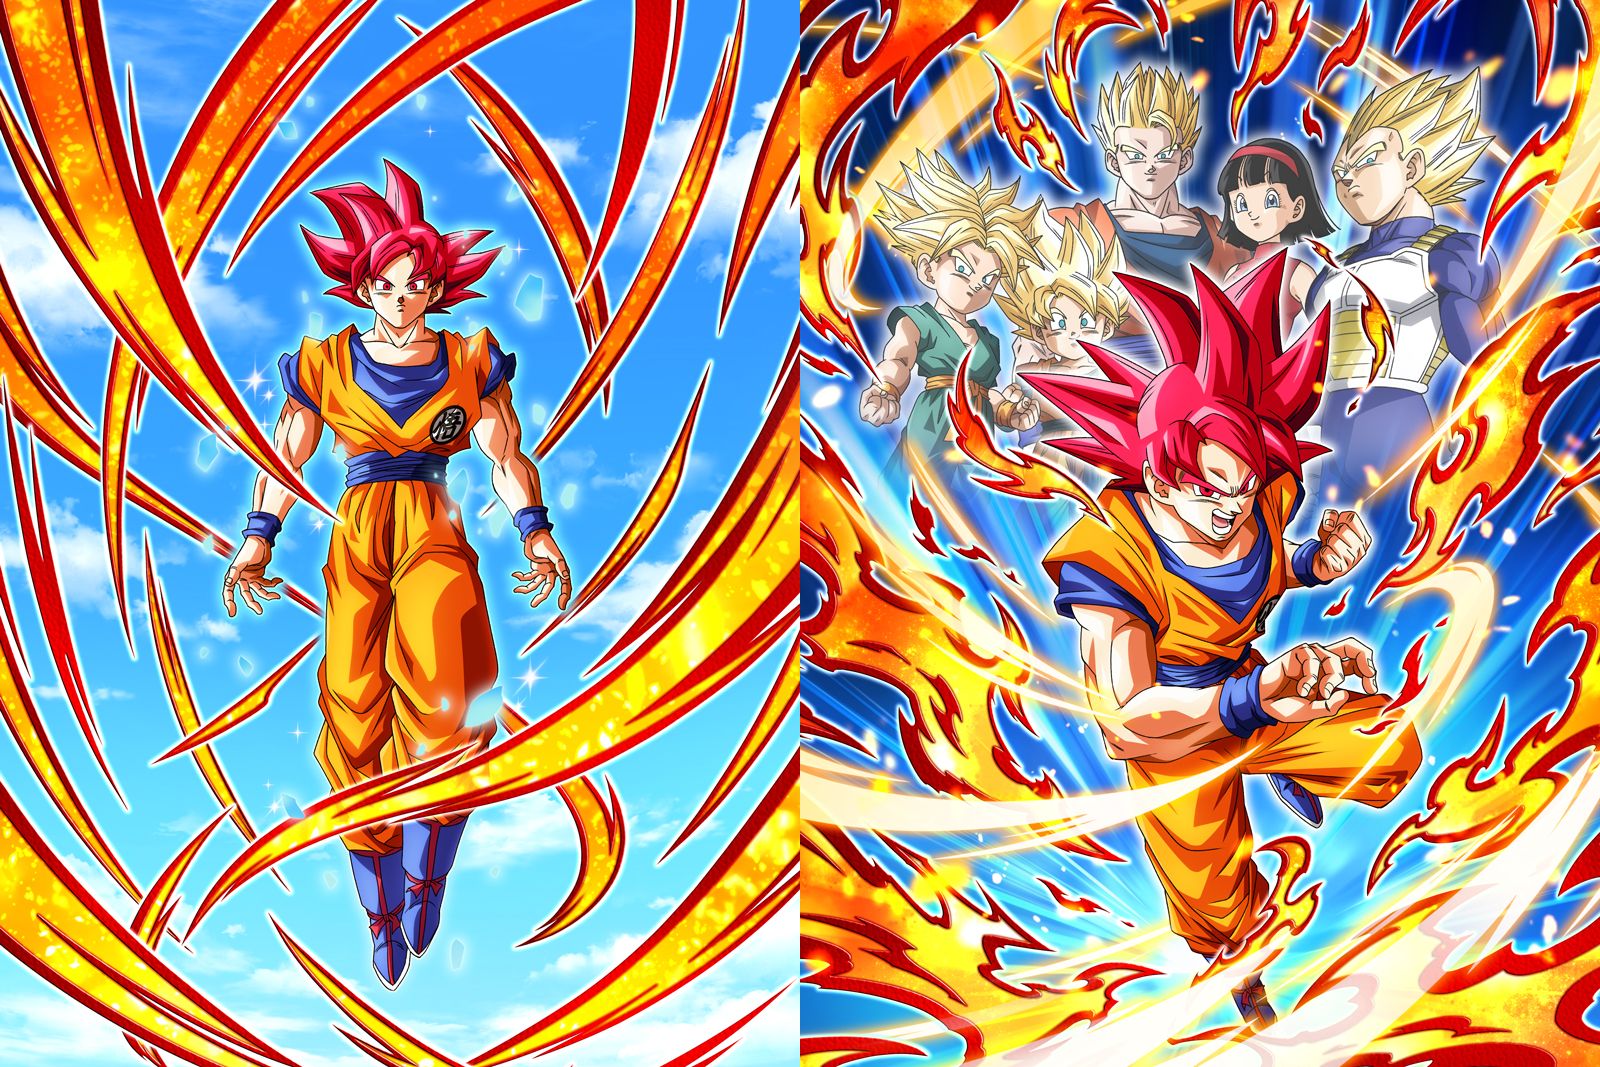 Saiyan Day] Dokkan Battle Releasing New Super Saiyan God Goku! Check Out  the Painstakingly Crafted Animations!!] | DRAGON BALL OFFICIAL SITE